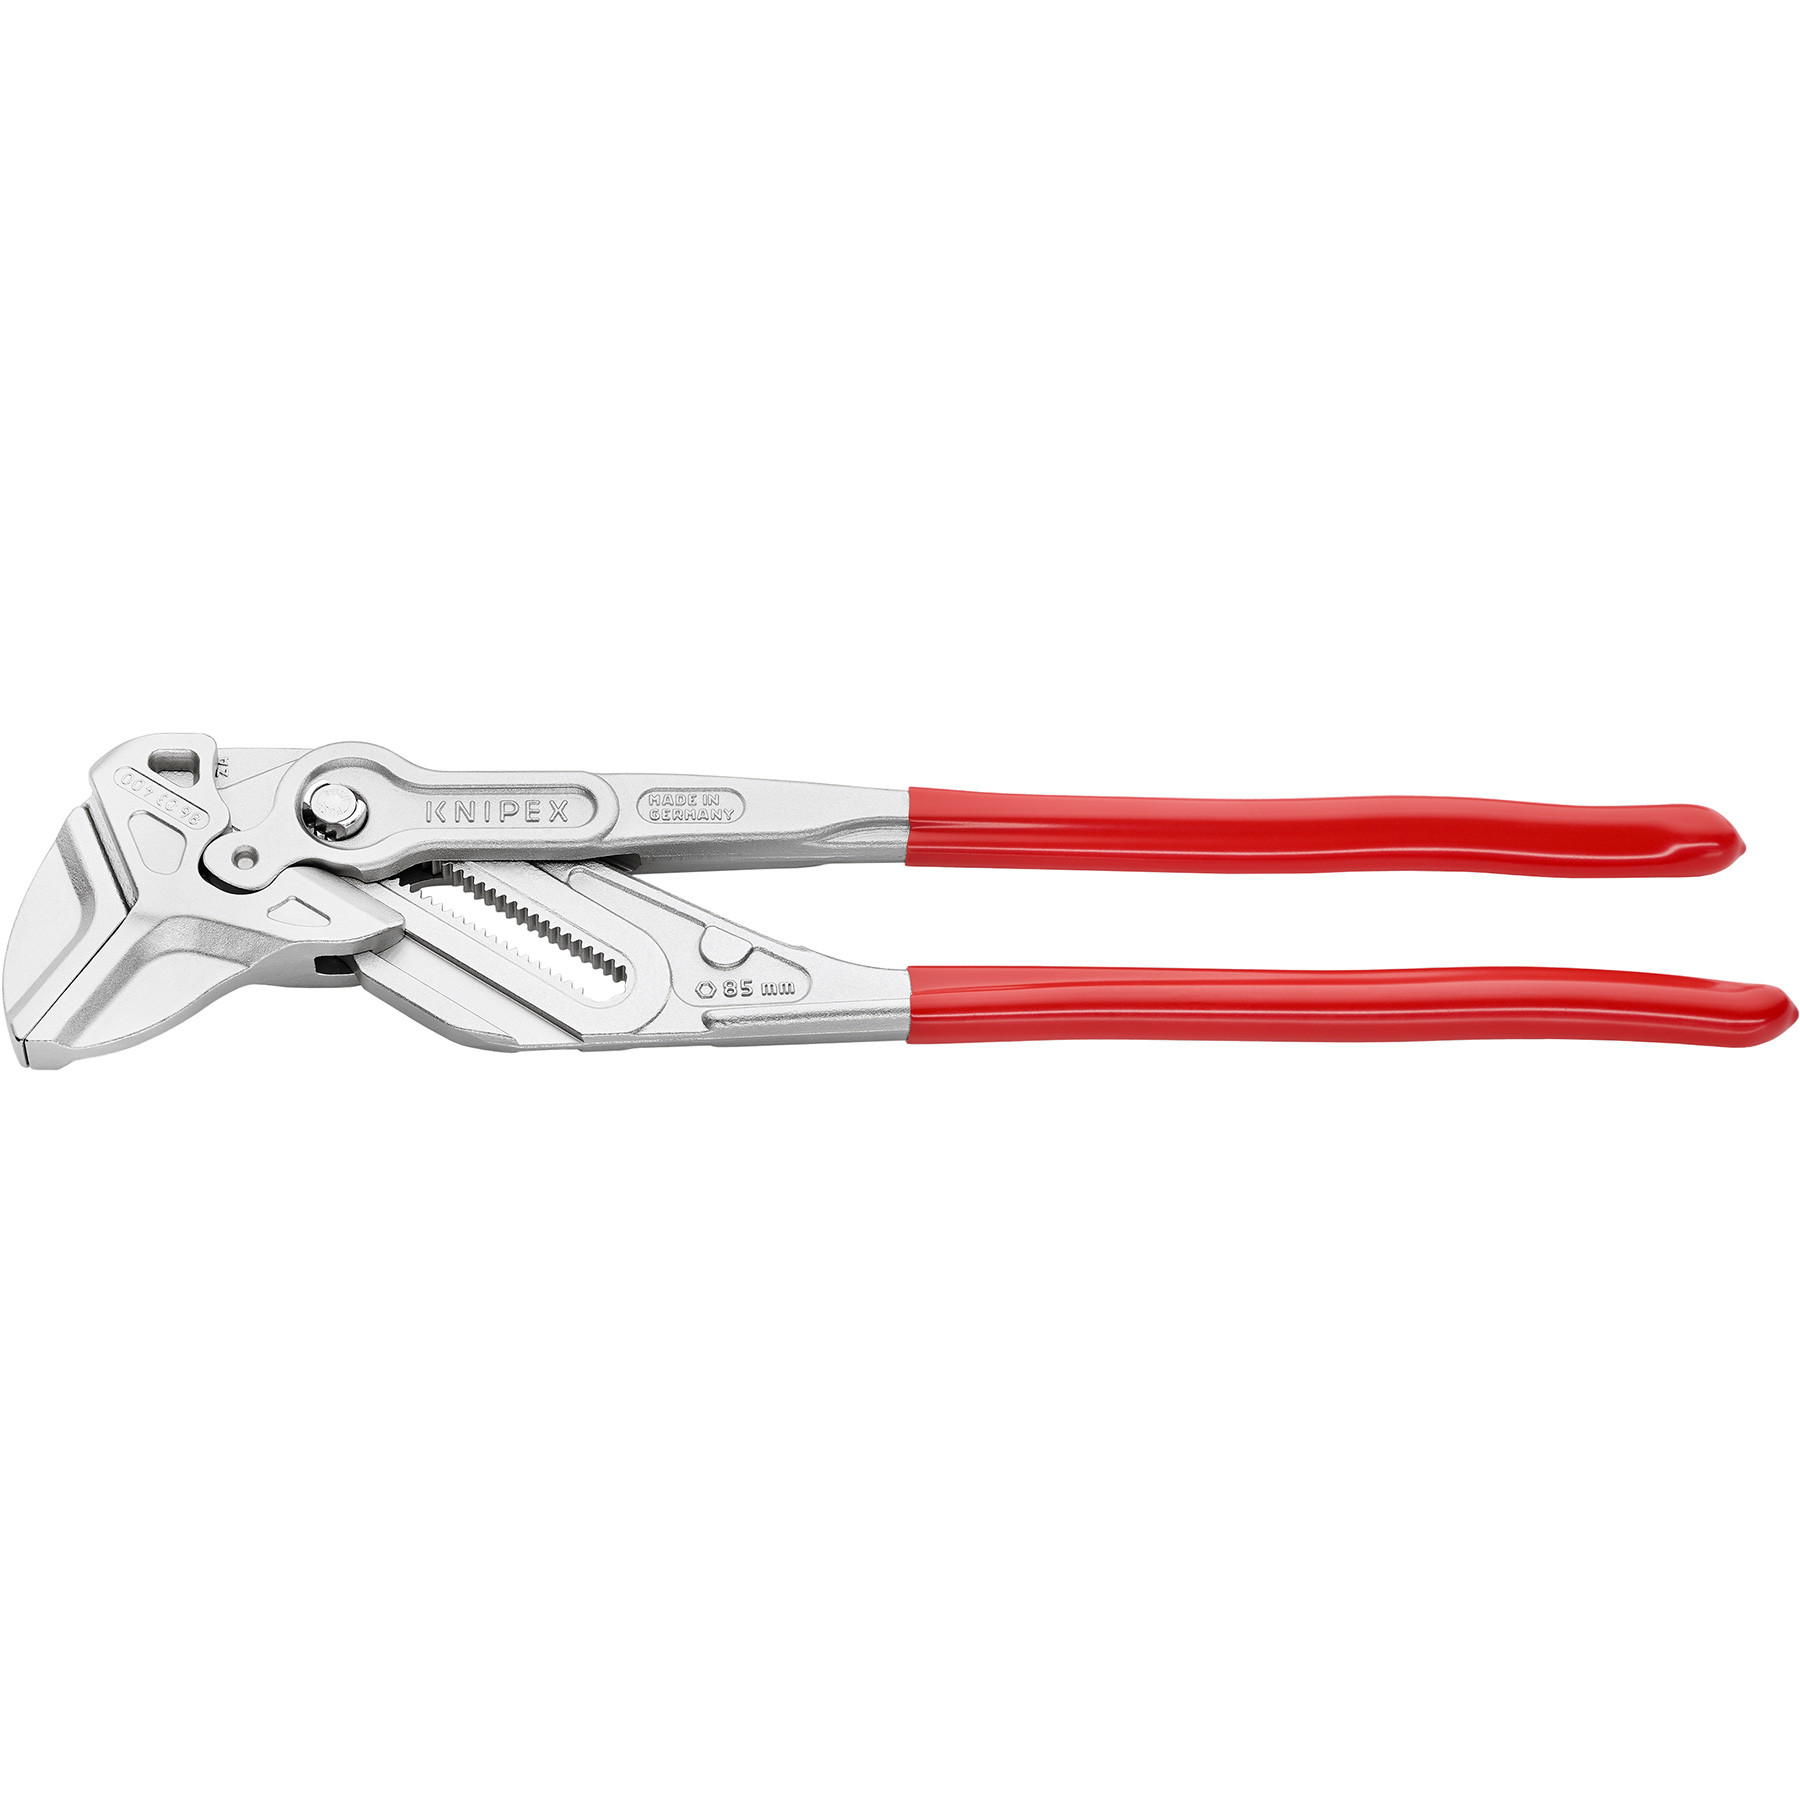 KNIPEX Pliers Wrench, Chrome, XL 16 (86 03 400) - DRPD